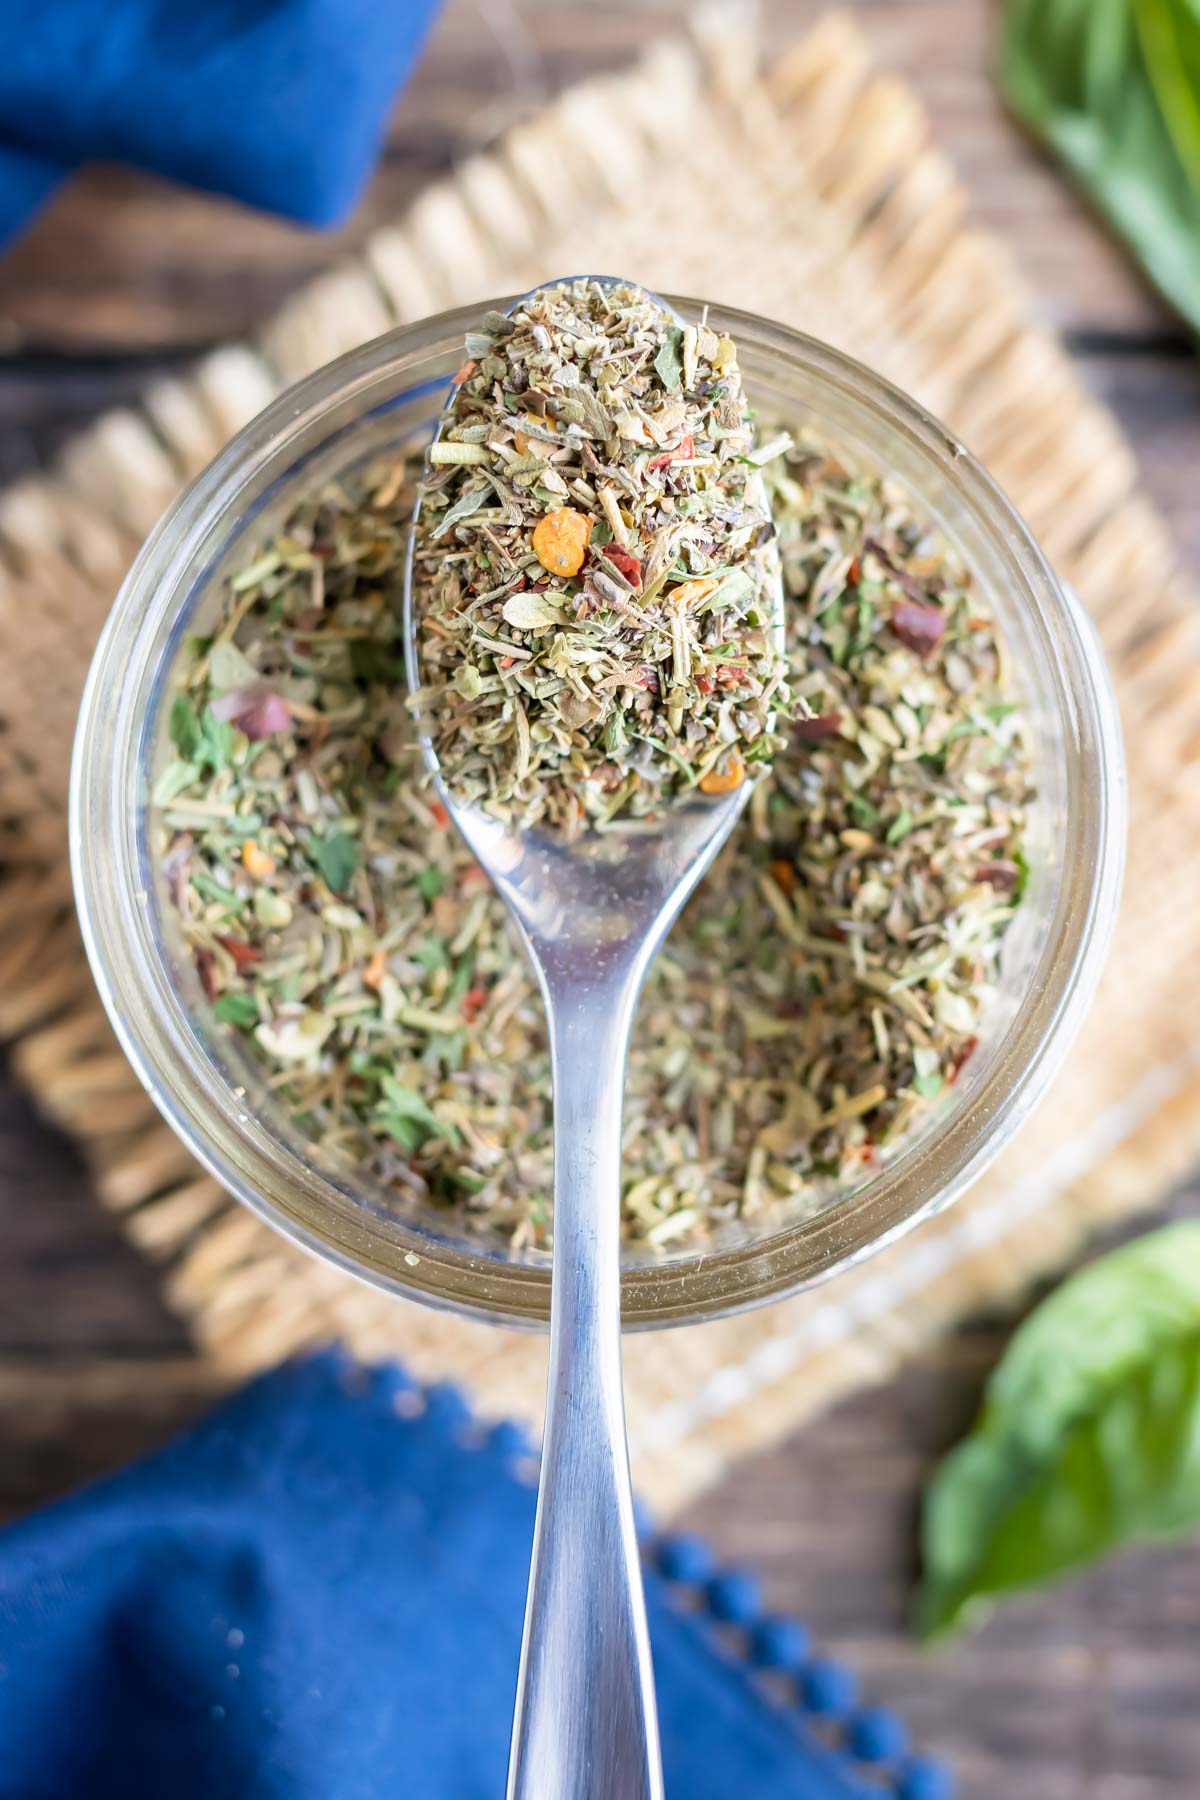 A clear glass jar with a spoon scooping out a DIY seasoning mix made with Italian herbs.